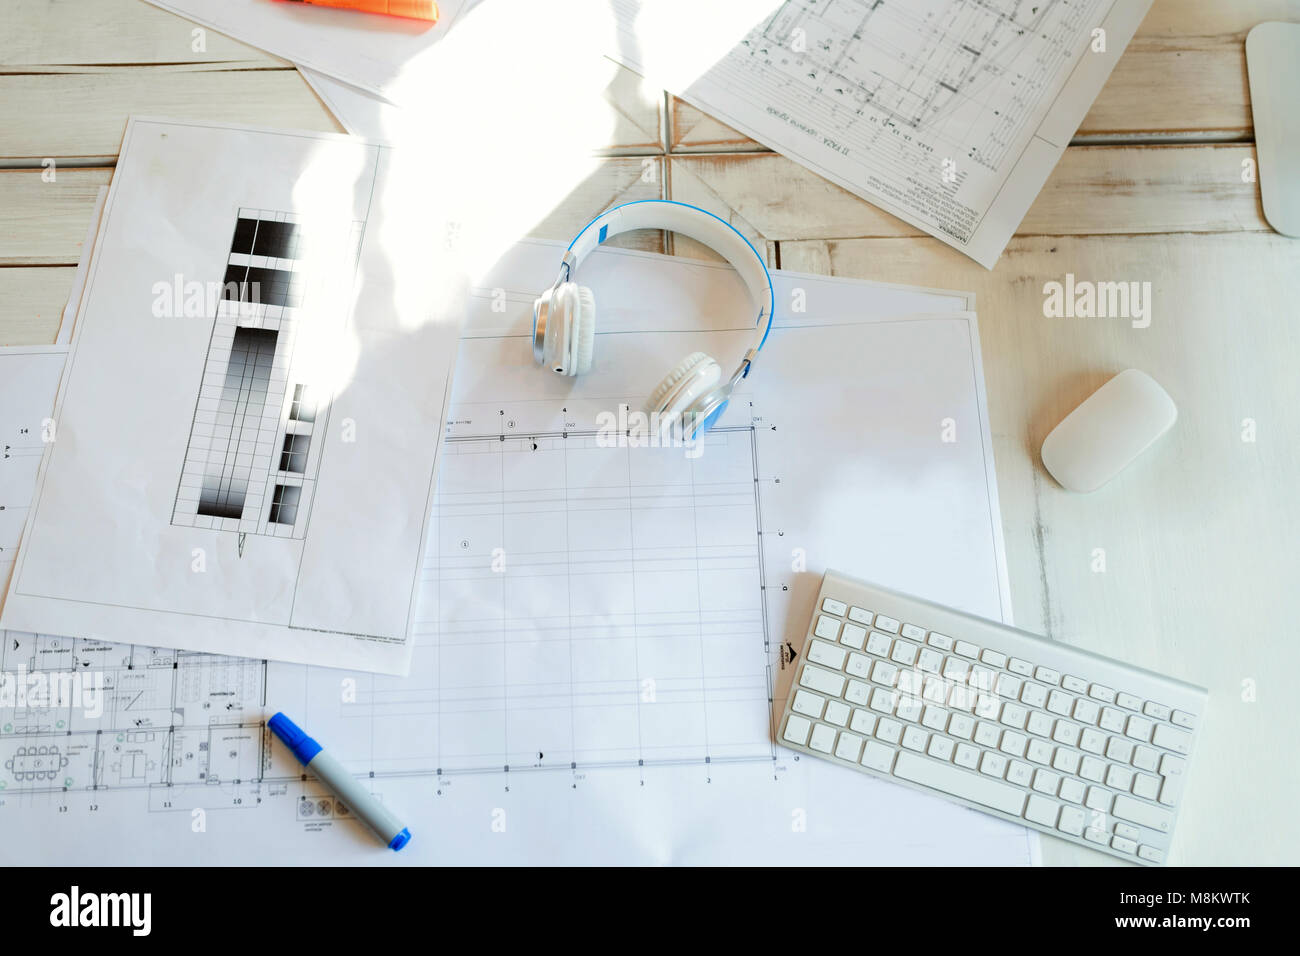 Architectural project, blueprints, blueprint rolls on wooden desk table Stock Photo